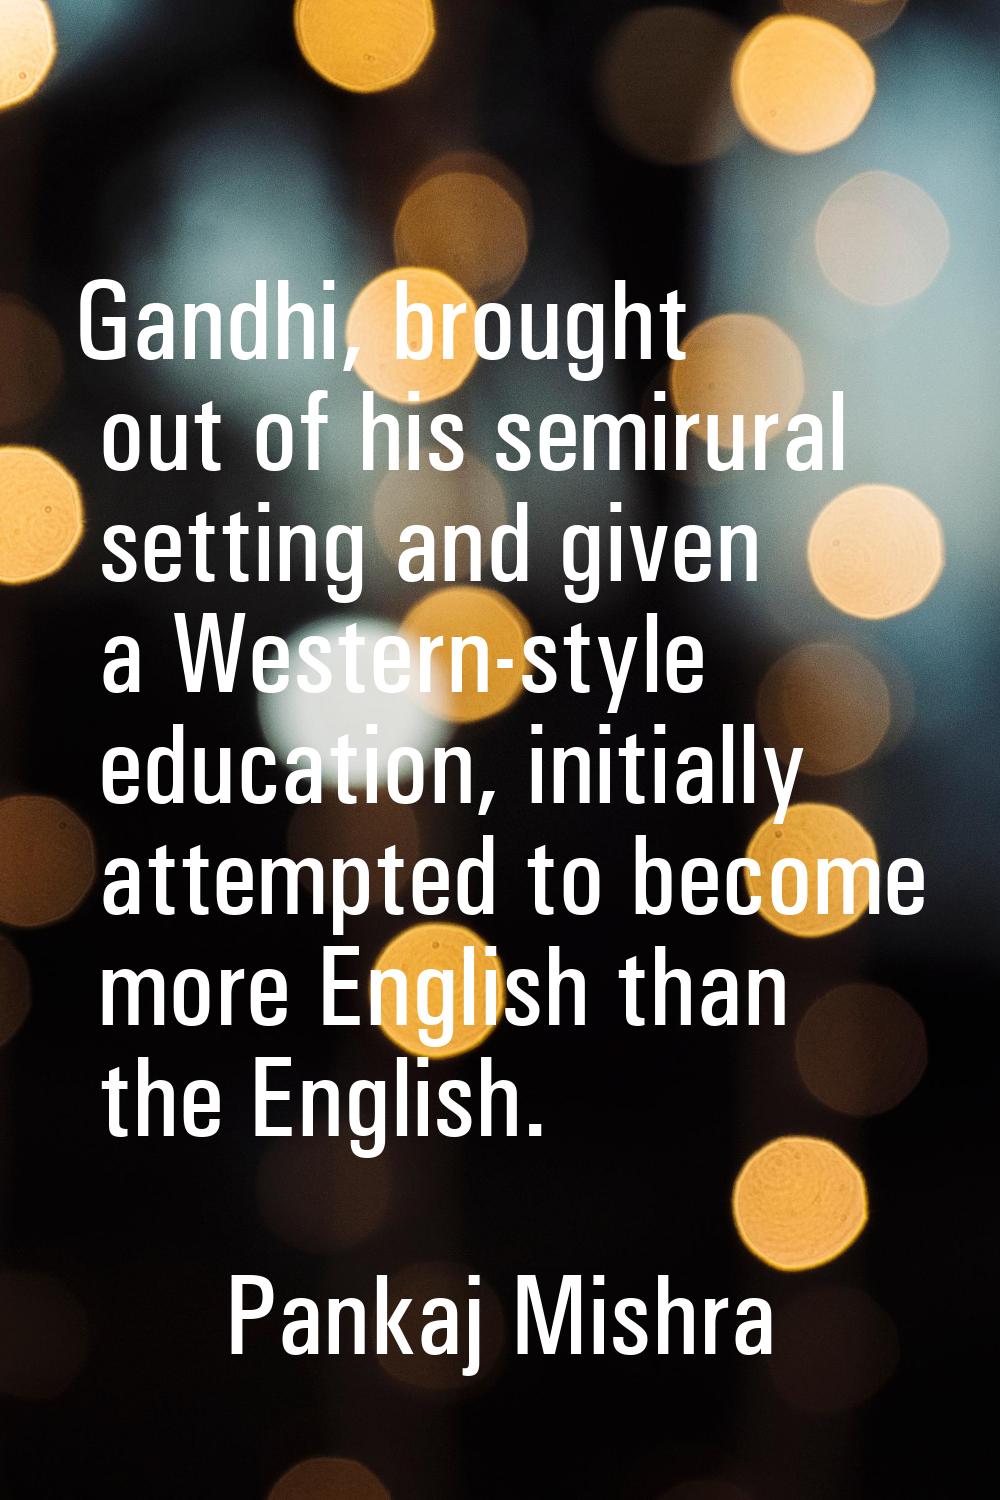 Gandhi, brought out of his semirural setting and given a Western-style education, initially attempt